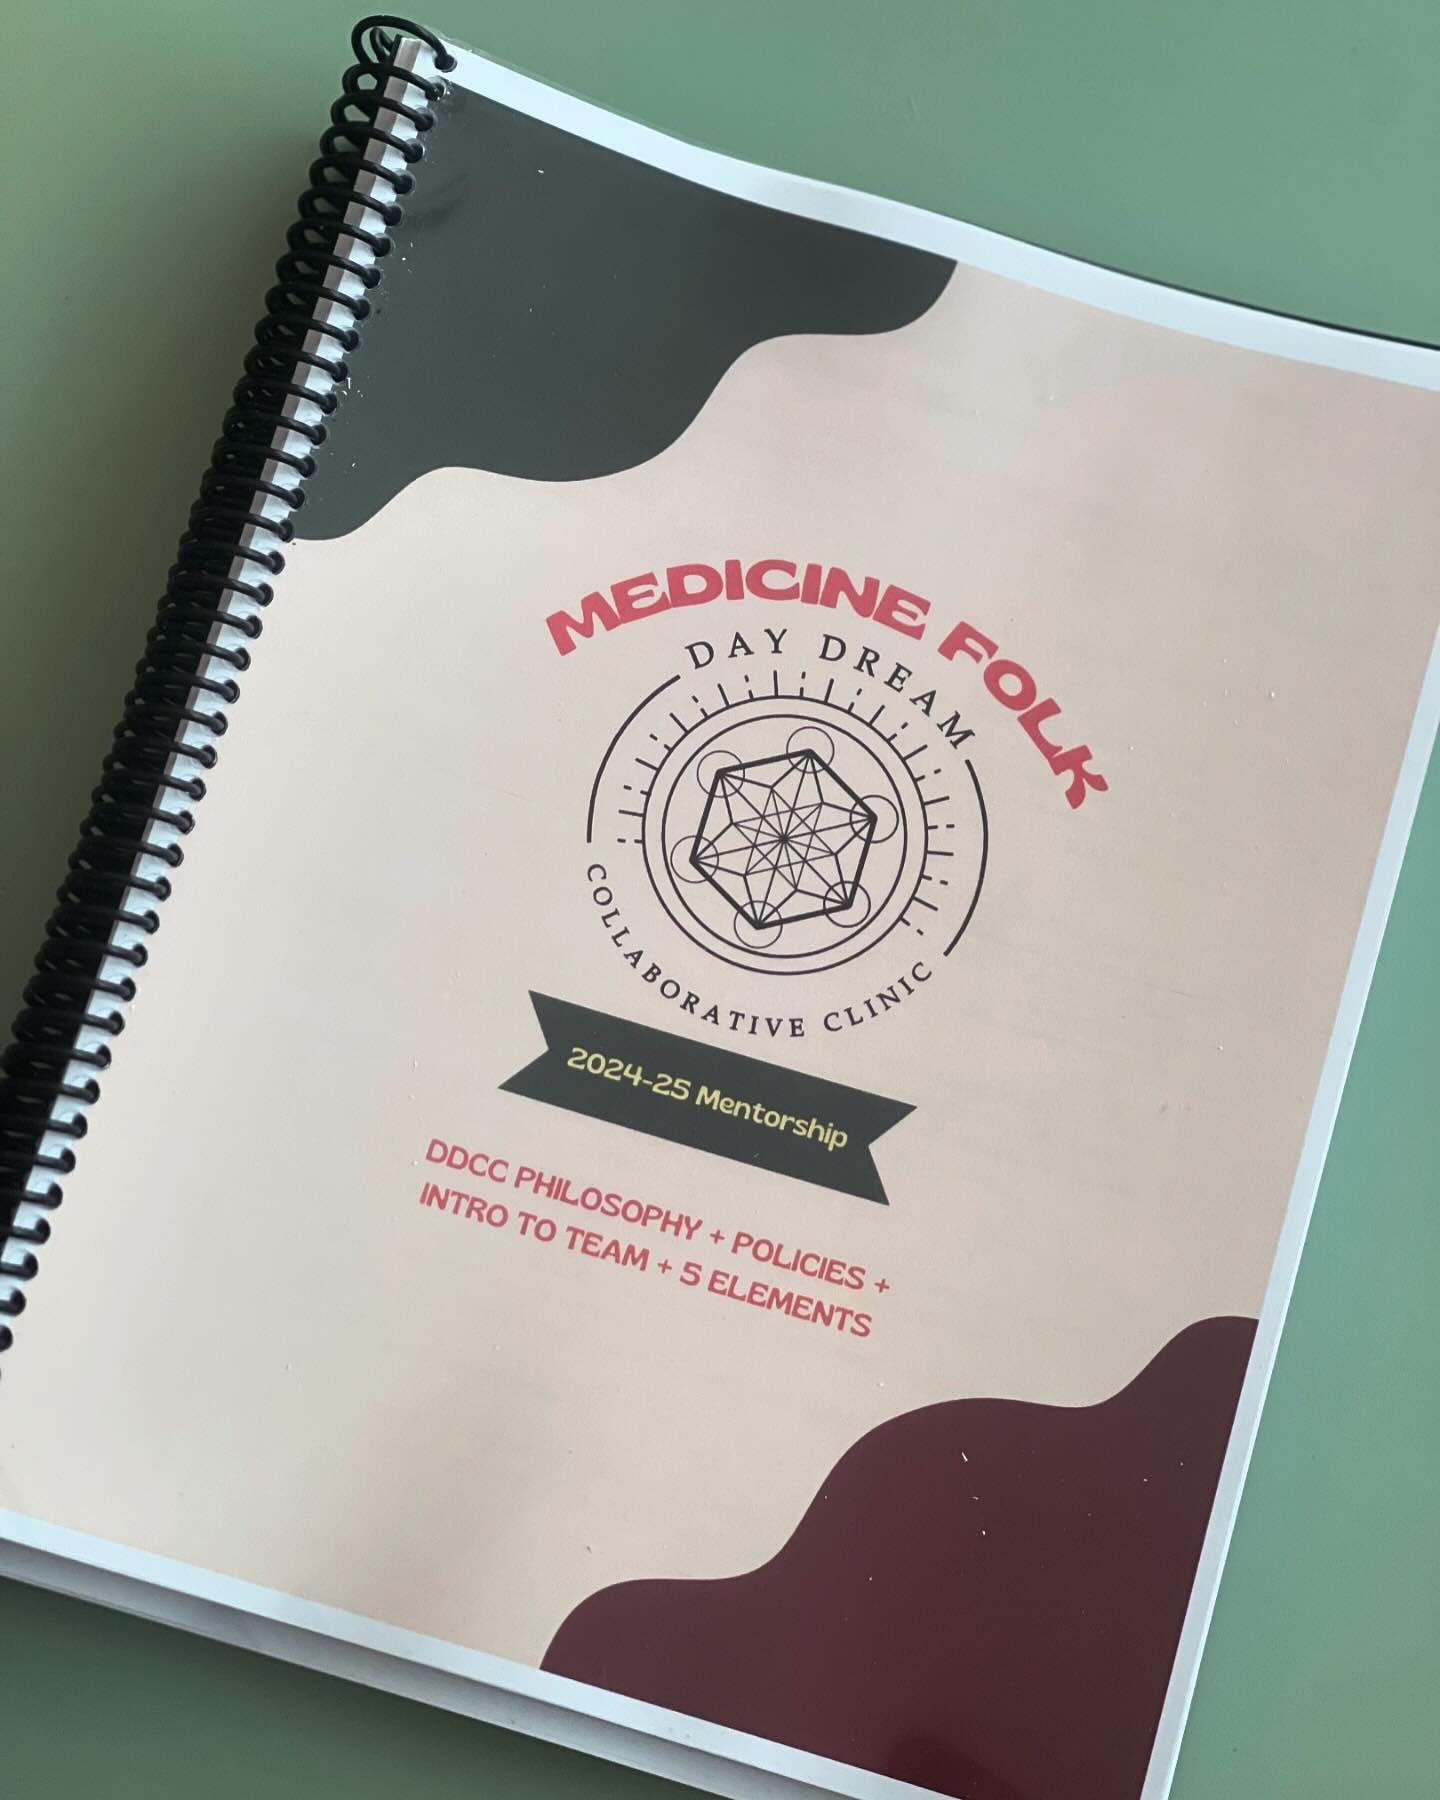 The Medicine Folk manuals are in and we start our next round of mentorship this weekend! 

Expect to see some new friendly faces around clinic and a whole lot of new offerings and skills that will be shared with the community over the upcoming year ✨